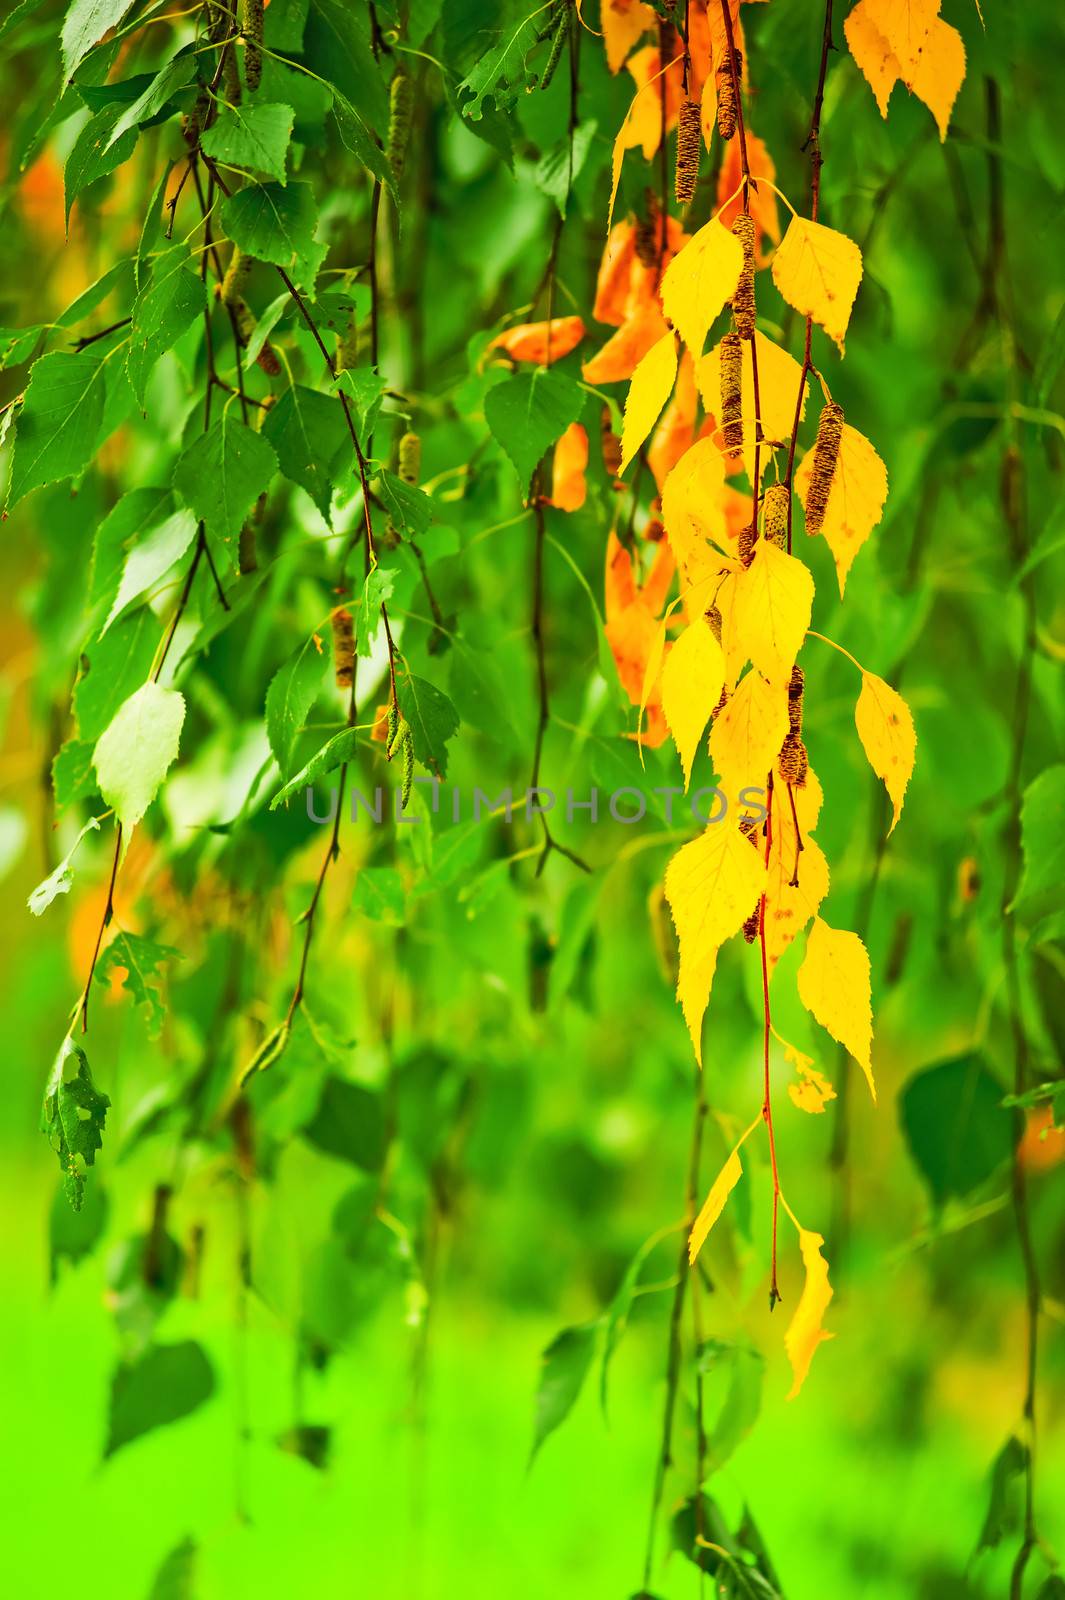 Yellowing birch leaves on a background of green leaves by kosmsos111